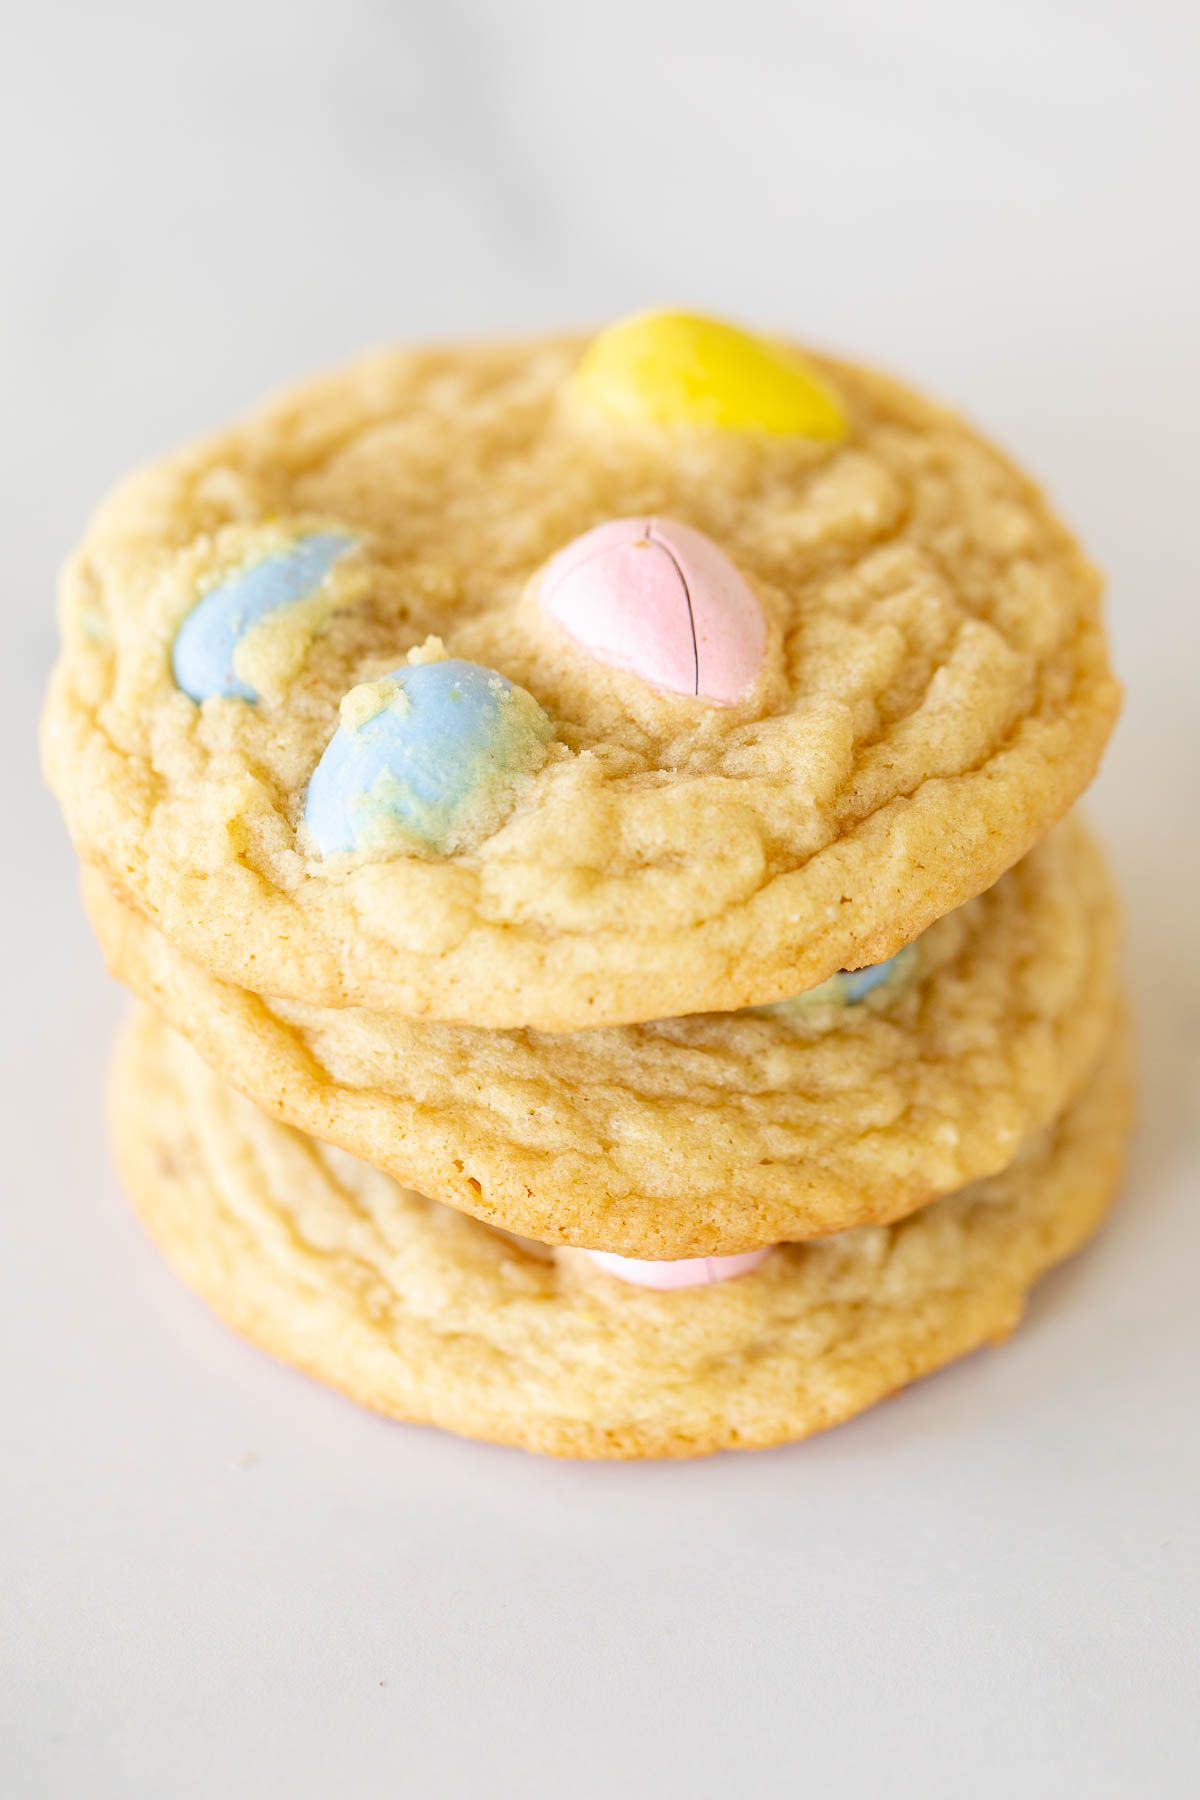 A stack of multiple mini egg cookies, on a marble surface for Easter.